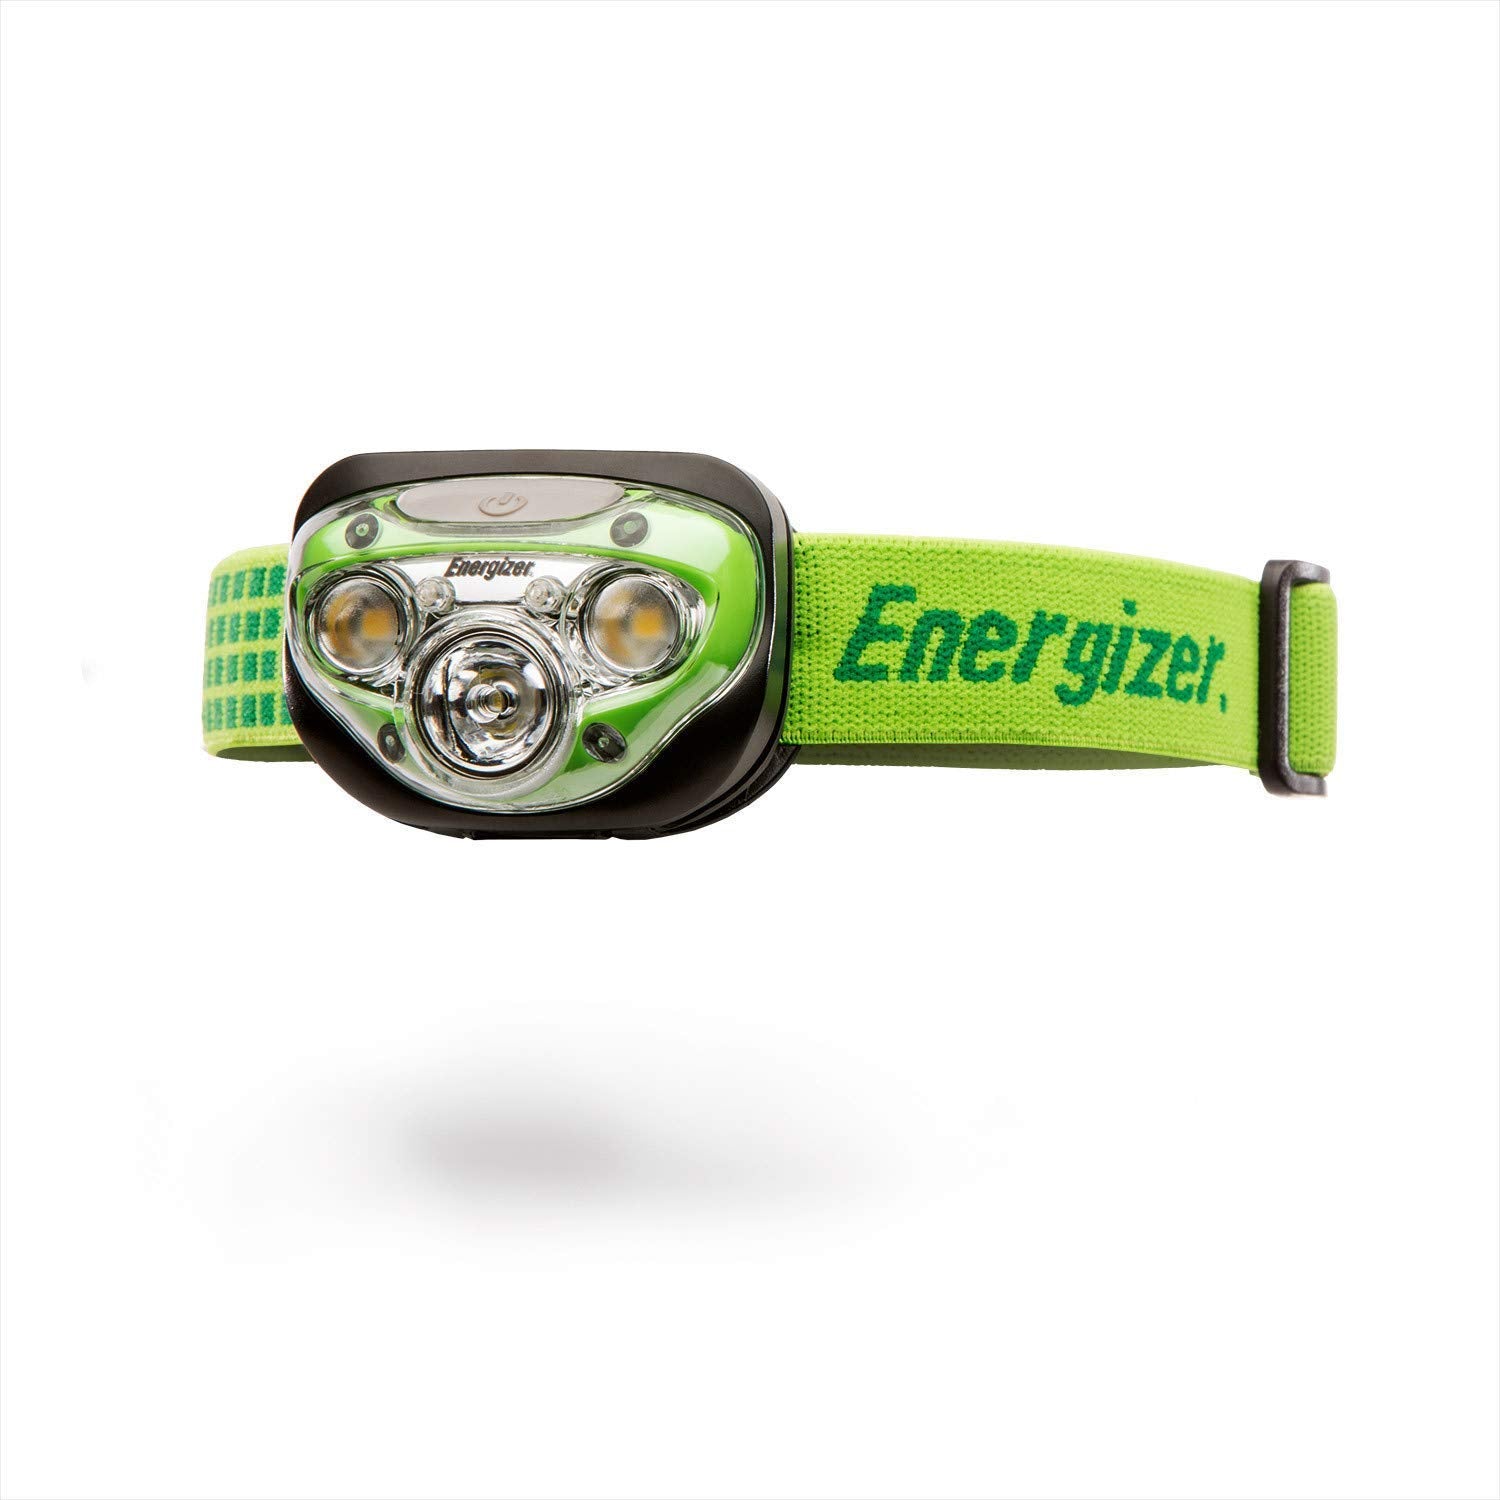 Energizer Vision HD+ Head Torch, Bright Headlamp, Water Resistant, Hands-Free, Lightweight for Indoor and Outdoor Activities, Batteries Included